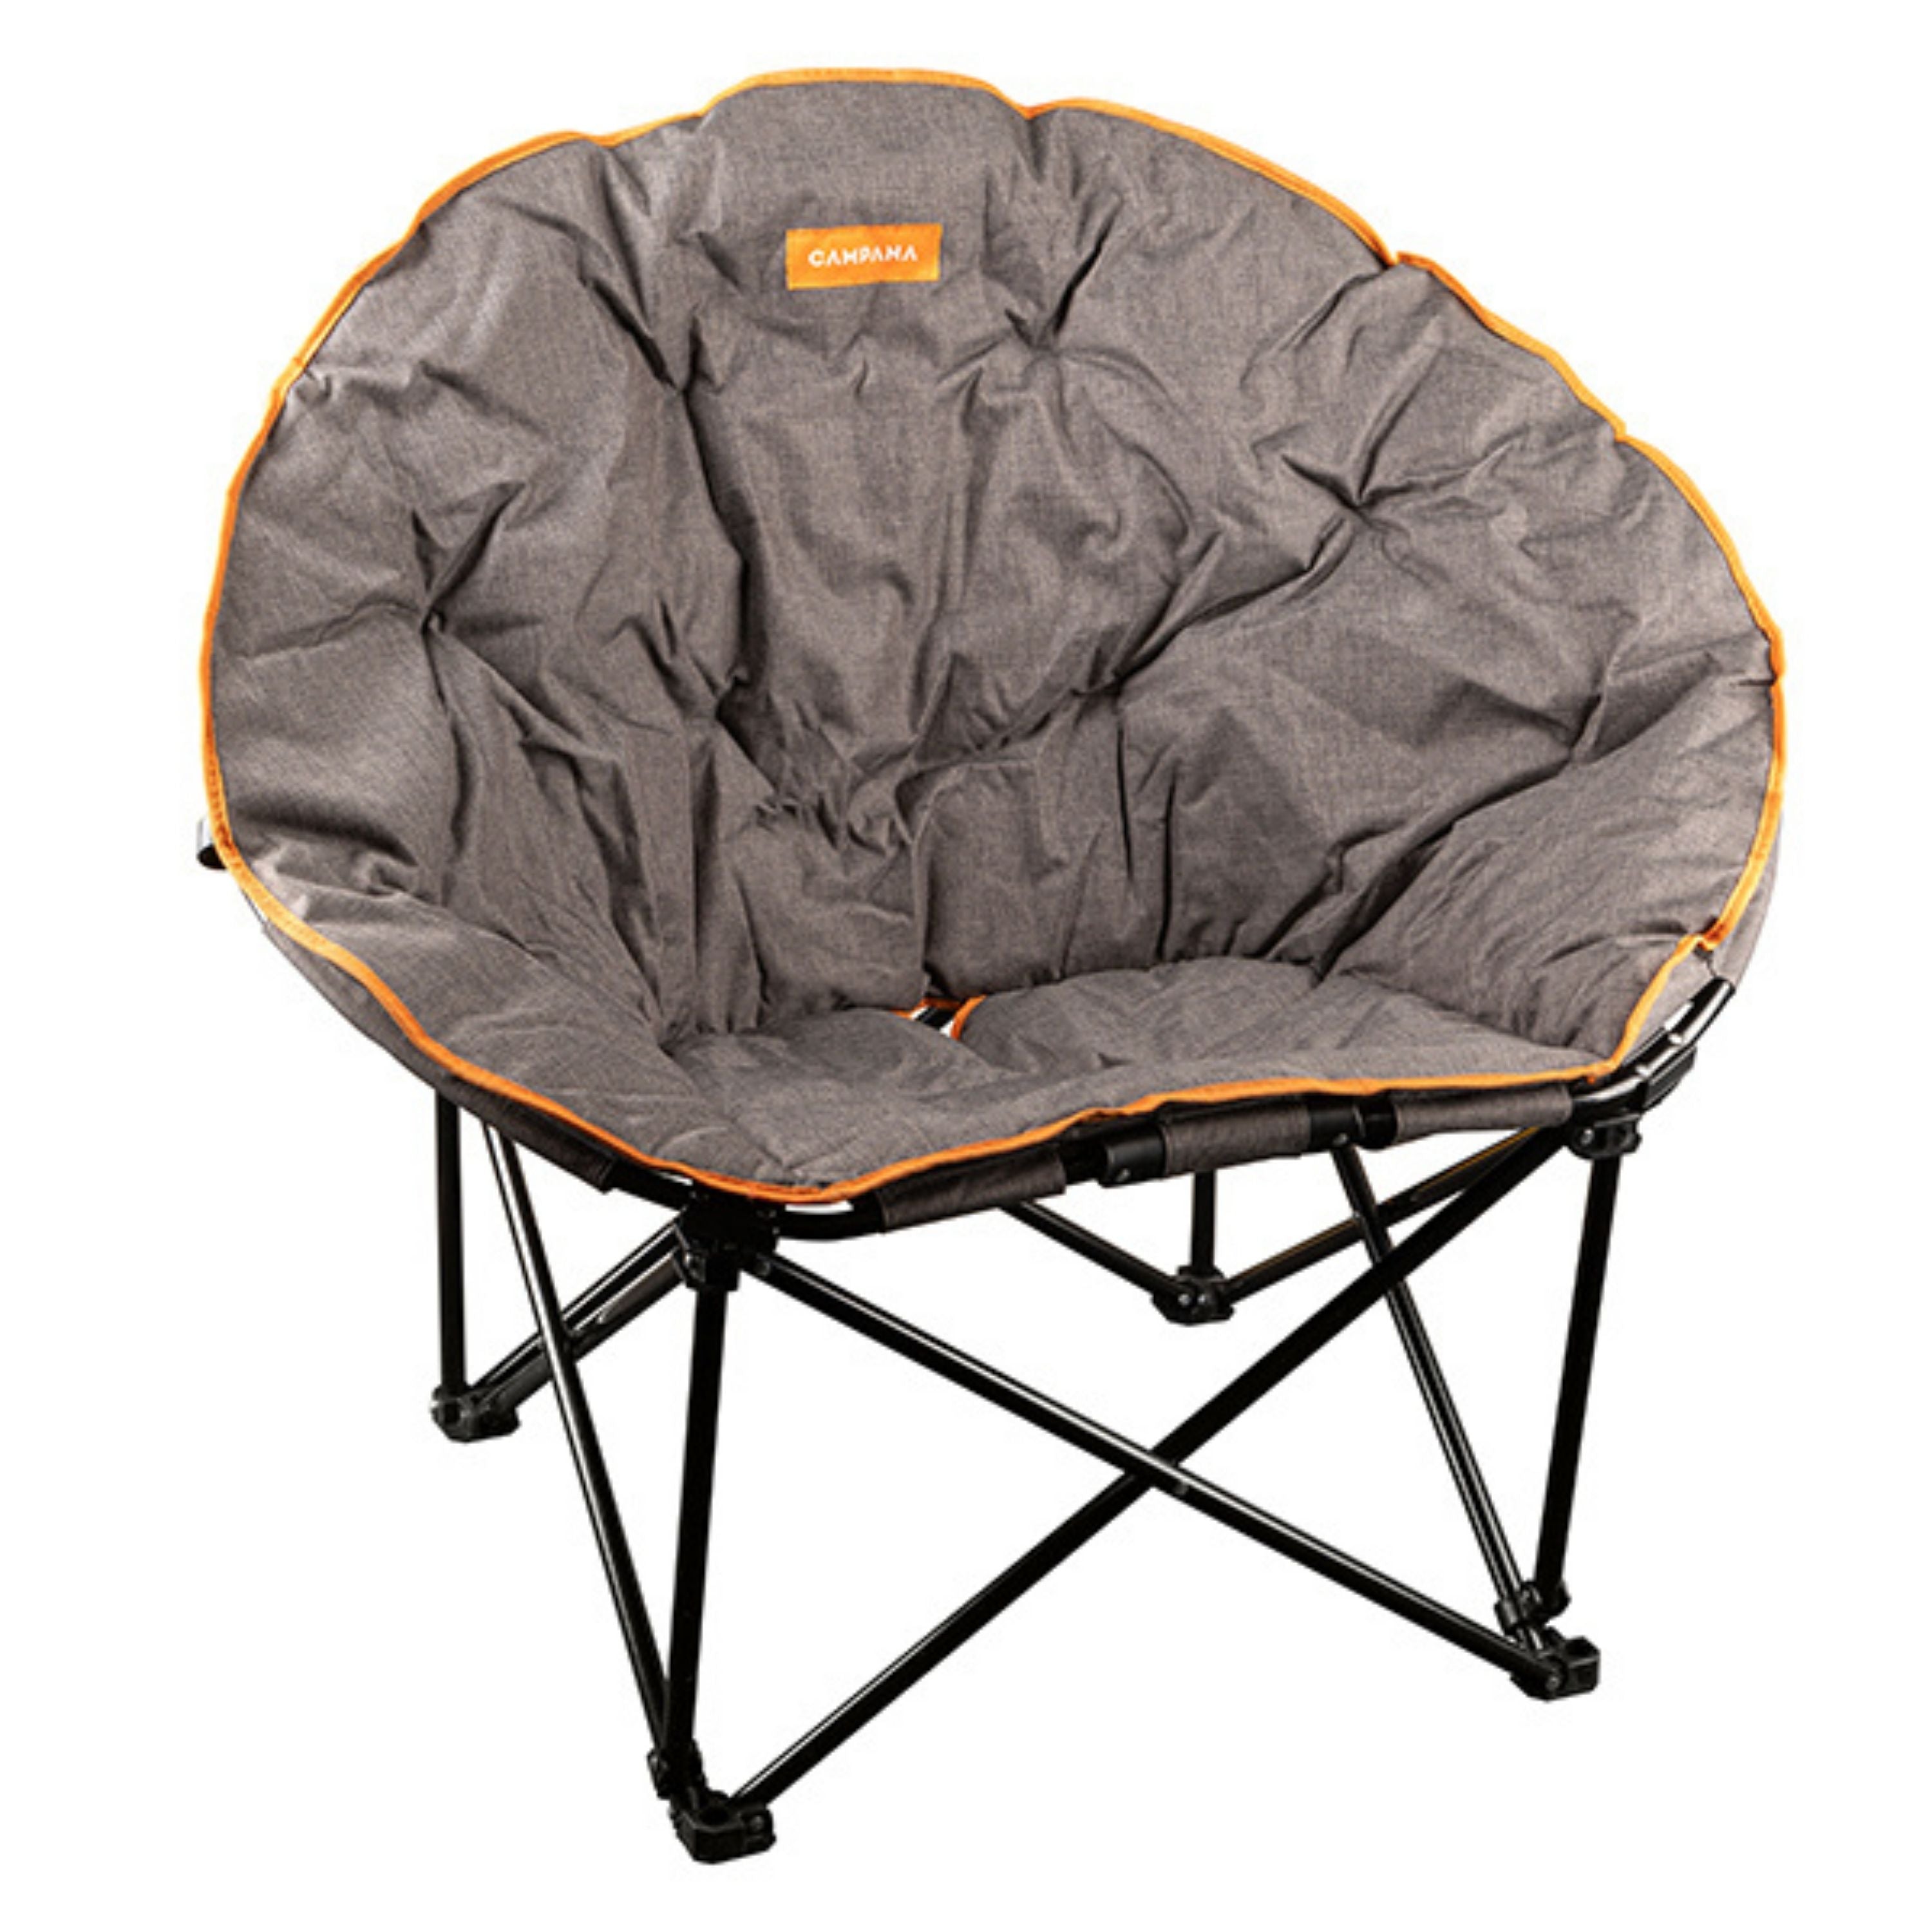 "Deluxe" Camping chair